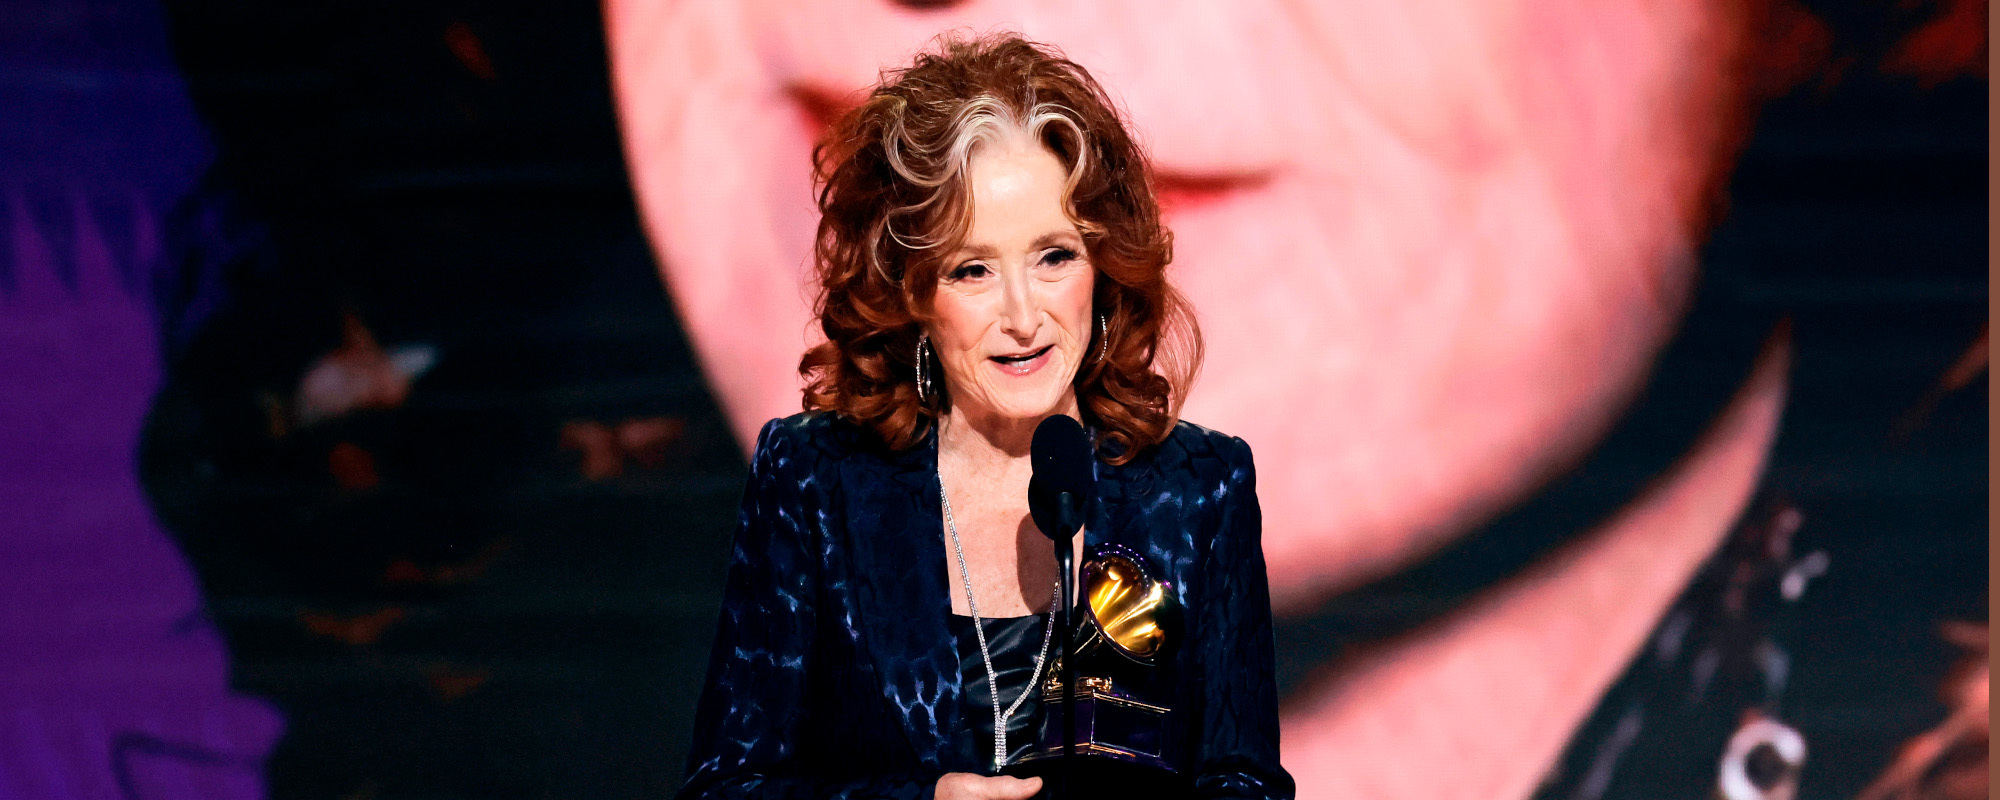 Bonnie Raitt Wins Song of the Year for “Just Like That” at Grammy Awards.